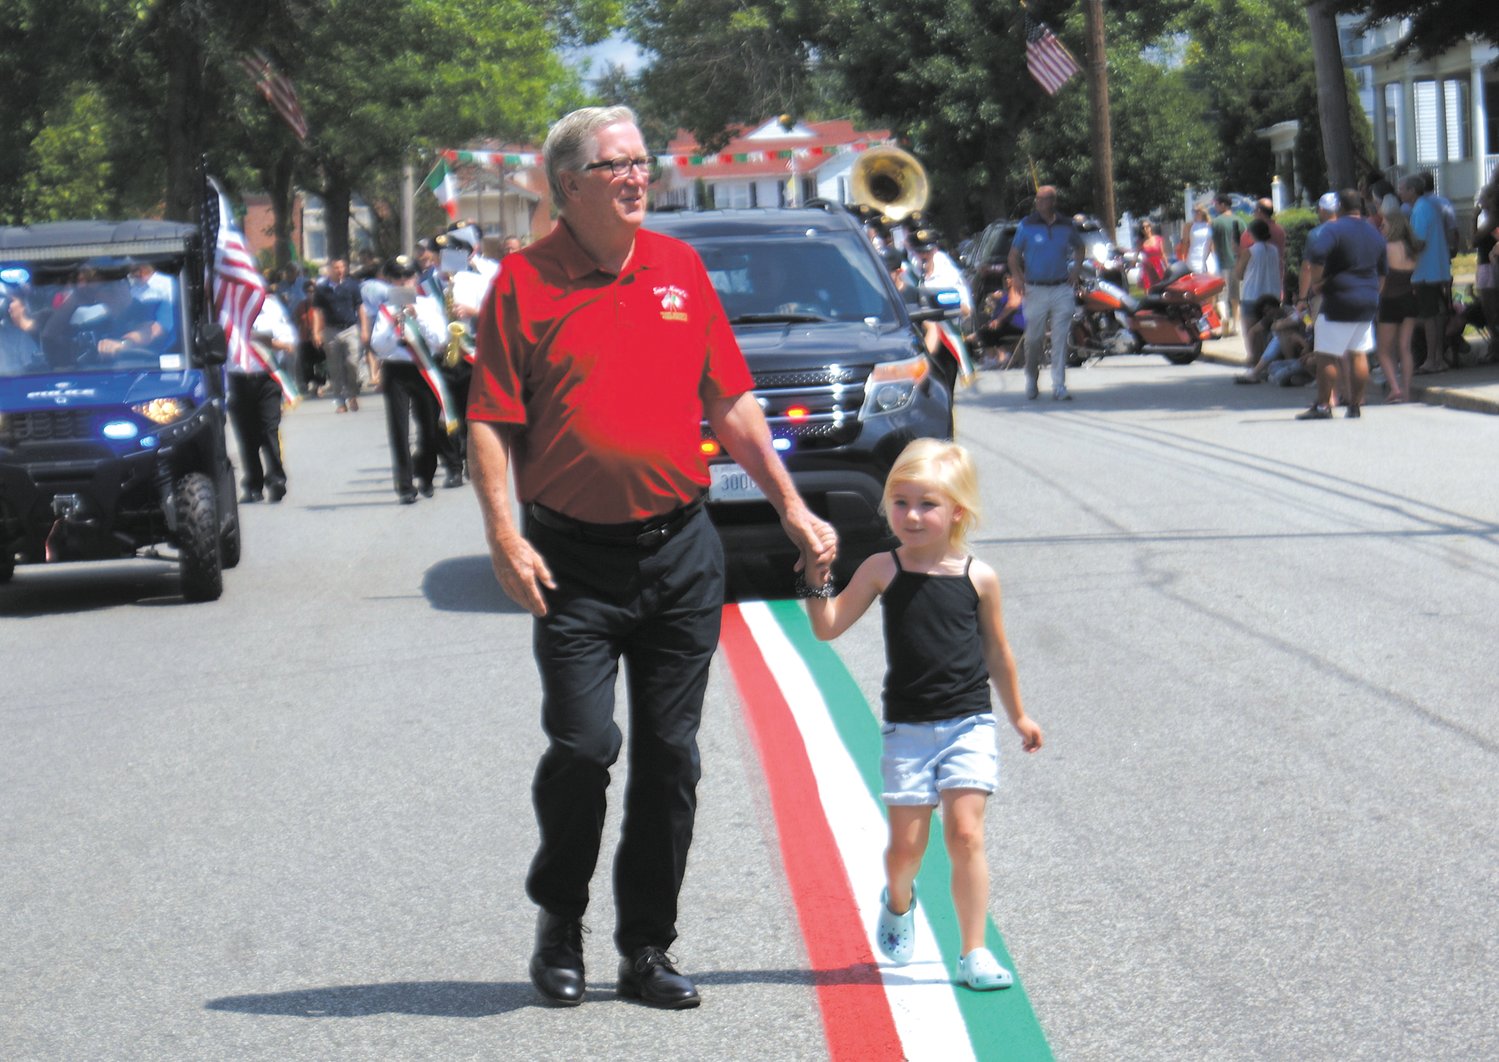 GRANFATHER AND GRANDDAUGHTER: Mayor Ken Hopkins marches in the St. Mary’s Feast Processional with his granddaughter Chloe Shackleford, 5. This was Chloe’s first time marching in the processional with her “Pa.” (Photo courtesy Steve Popiel)